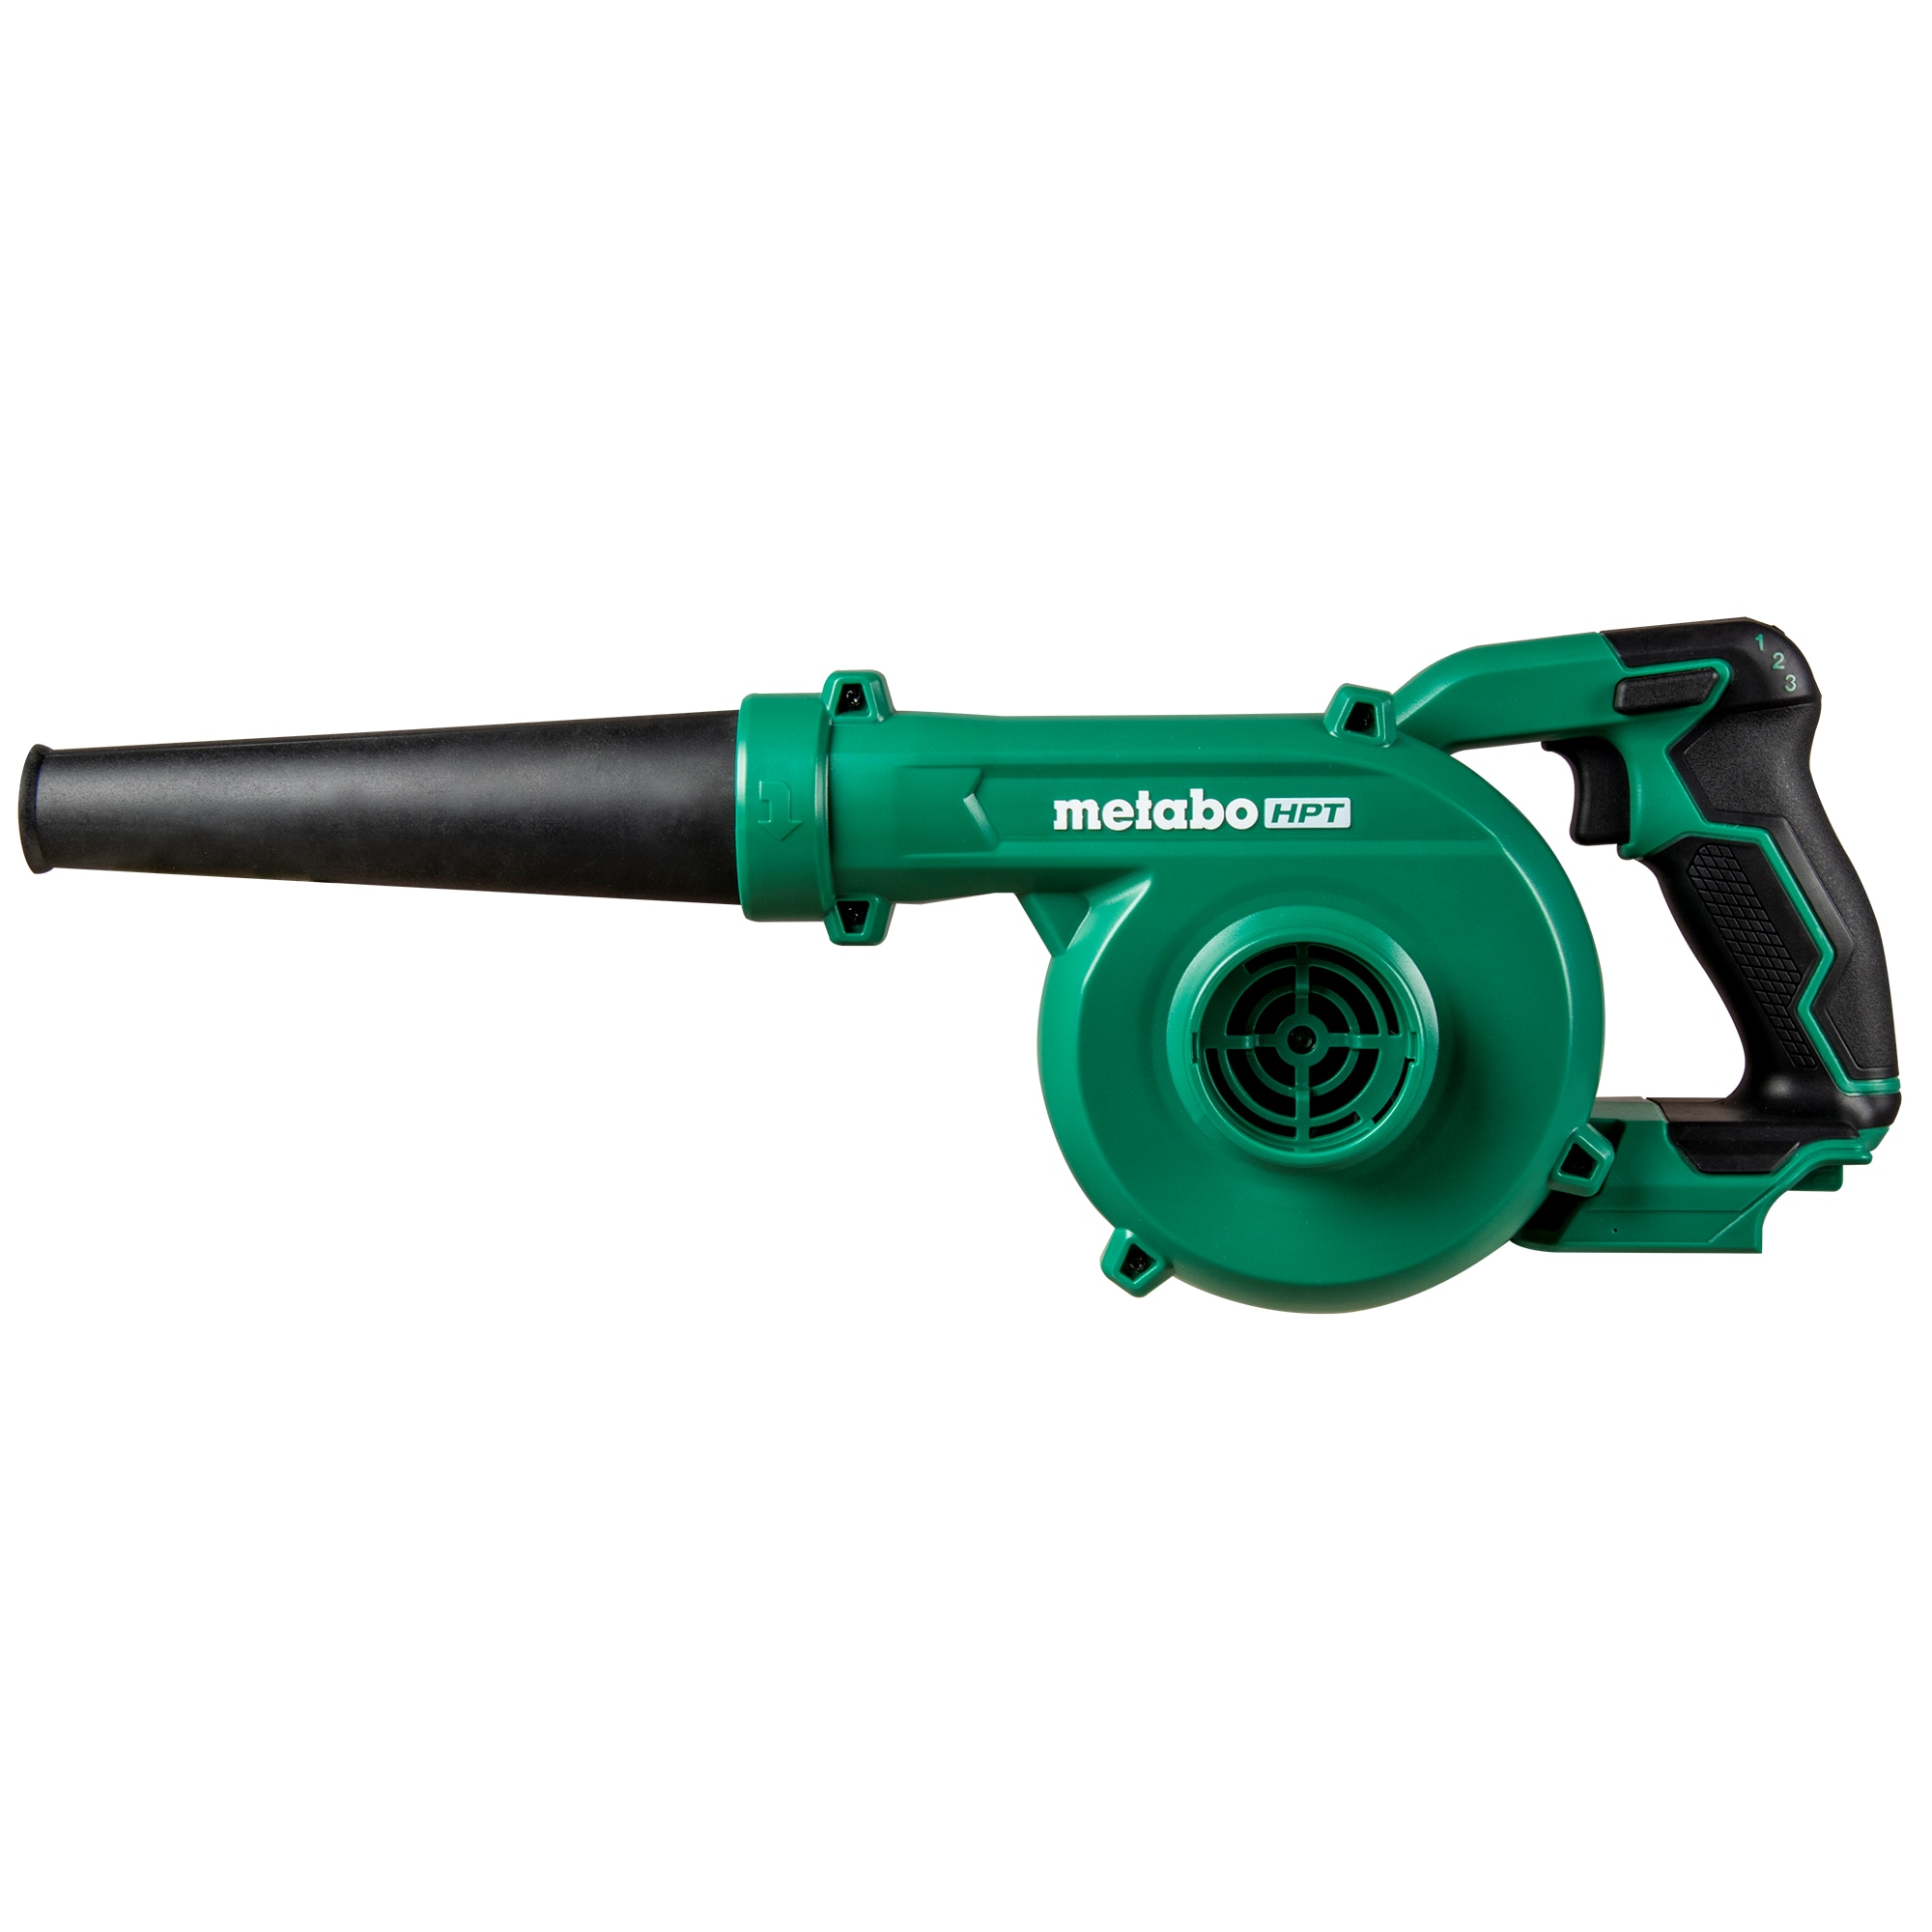 WORKSITE 20V Cordless Blower Vacuum 20000RPM High Speed Fan Dust